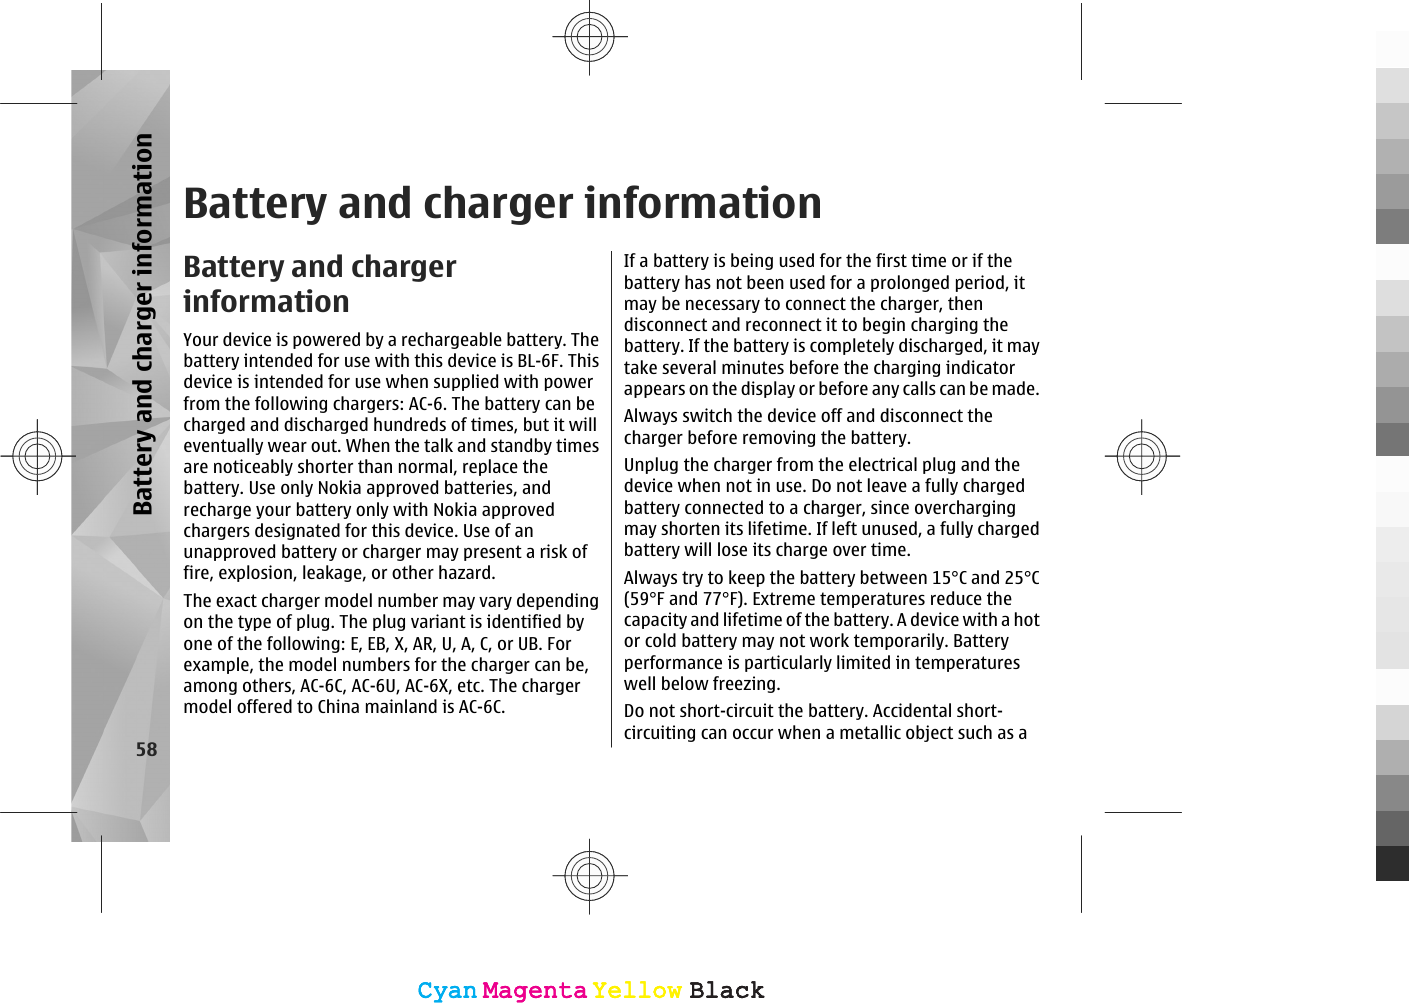 Battery and charger informationBattery and chargerinformationYour device is powered by a rechargeable battery. Thebattery intended for use with this device is BL-6F. Thisdevice is intended for use when supplied with powerfrom the following chargers: AC-6. The battery can becharged and discharged hundreds of times, but it willeventually wear out. When the talk and standby timesare noticeably shorter than normal, replace thebattery. Use only Nokia approved batteries, andrecharge your battery only with Nokia approvedchargers designated for this device. Use of anunapproved battery or charger may present a risk offire, explosion, leakage, or other hazard.The exact charger model number may vary dependingon the type of plug. The plug variant is identified byone of the following: E, EB, X, AR, U, A, C, or UB. Forexample, the model numbers for the charger can be,among others, AC-6C, AC-6U, AC-6X, etc. The chargermodel offered to China mainland is AC-6C.If a battery is being used for the first time or if thebattery has not been used for a prolonged period, itmay be necessary to connect the charger, thendisconnect and reconnect it to begin charging thebattery. If the battery is completely discharged, it maytake several minutes before the charging indicatorappears on the display or before any calls can be made.Always switch the device off and disconnect thecharger before removing the battery.Unplug the charger from the electrical plug and thedevice when not in use. Do not leave a fully chargedbattery connected to a charger, since overchargingmay shorten its lifetime. If left unused, a fully chargedbattery will lose its charge over time.Always try to keep the battery between 15°C and 25°C(59°F and 77°F). Extreme temperatures reduce thecapacity and lifetime of the battery. A device with a hotor cold battery may not work temporarily. Batteryperformance is particularly limited in temperatureswell below freezing.Do not short-circuit the battery. Accidental short-circuiting can occur when a metallic object such as a58Battery and charger informationCyanCyanMagentaMagentaYellowYellowBlackBlackCyanCyanMagentaMagentaYellowYellowBlackBlack